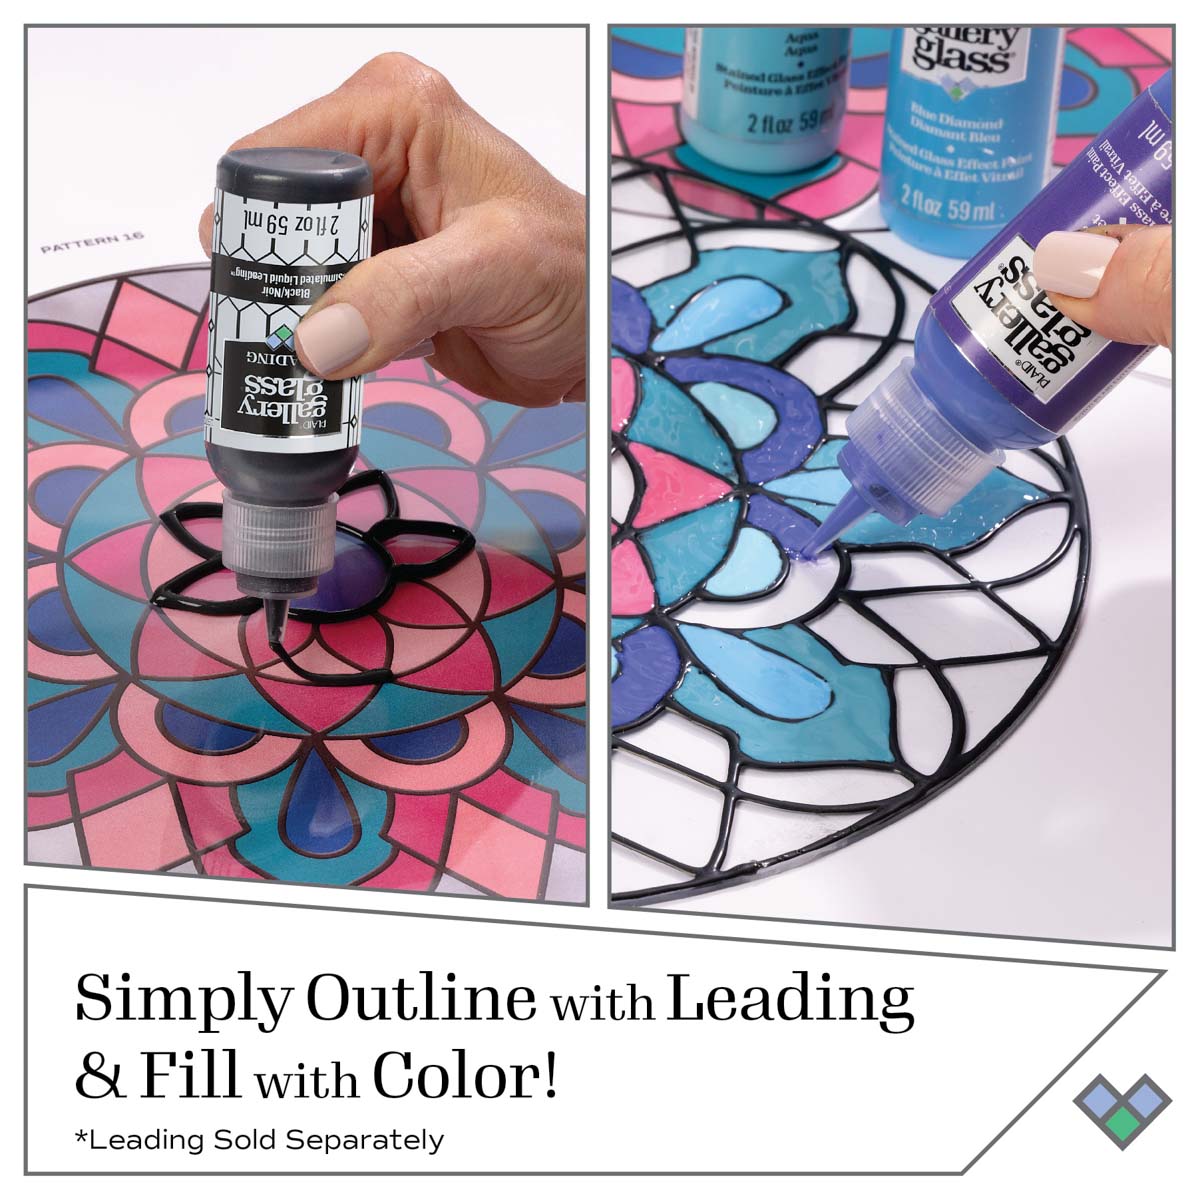 Gallery Glass ® Stained Glass Effect Paint - Denim, 2 oz. - 20033